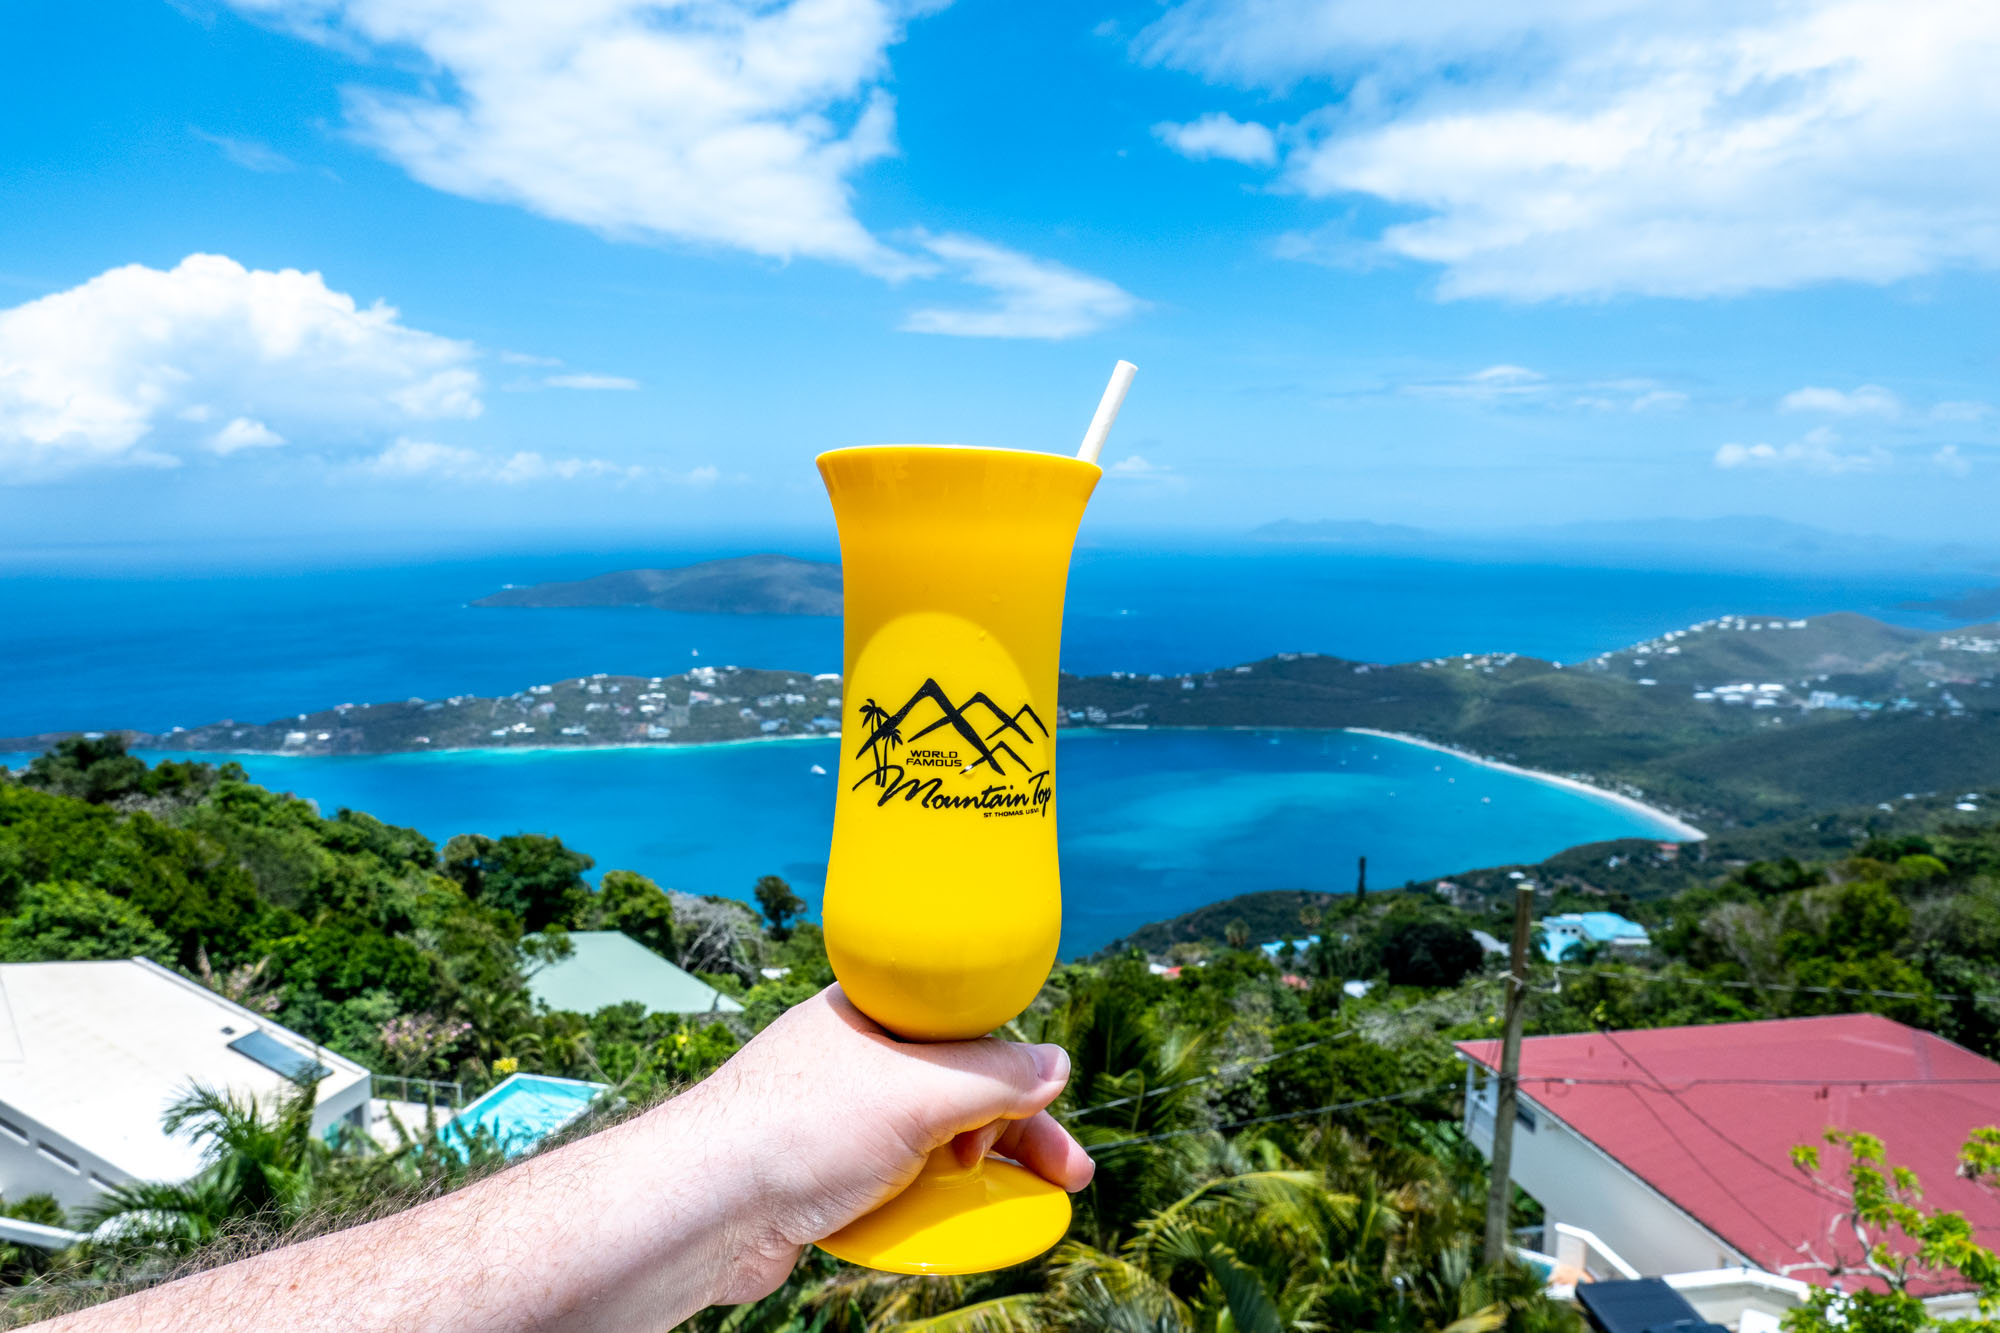 Hand holding a yellow cup labeled "Mountain Top" in front of a view of an island landscape